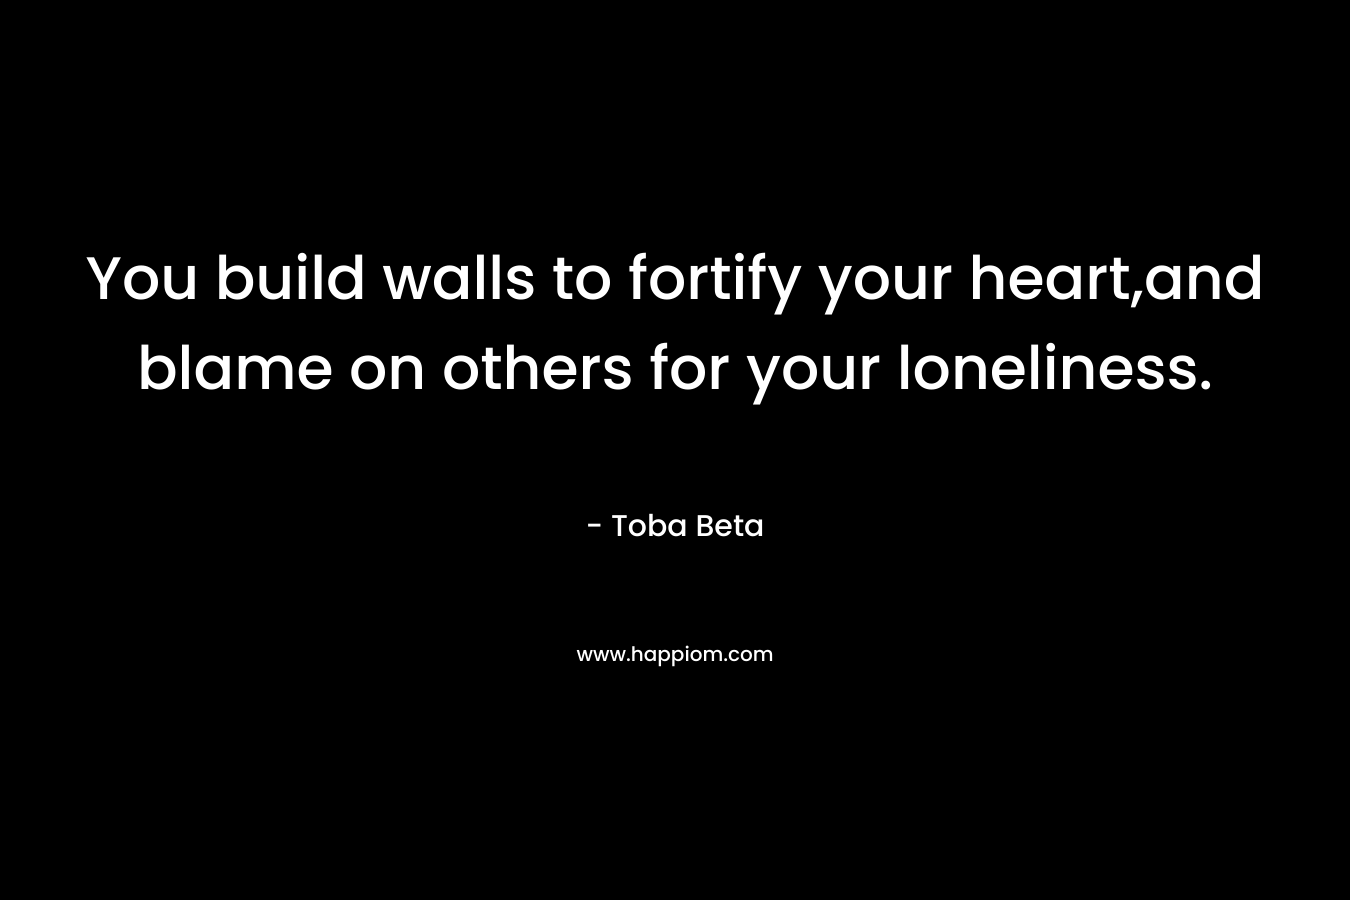 You build walls to fortify your heart,and blame on others for your loneliness. – Toba Beta